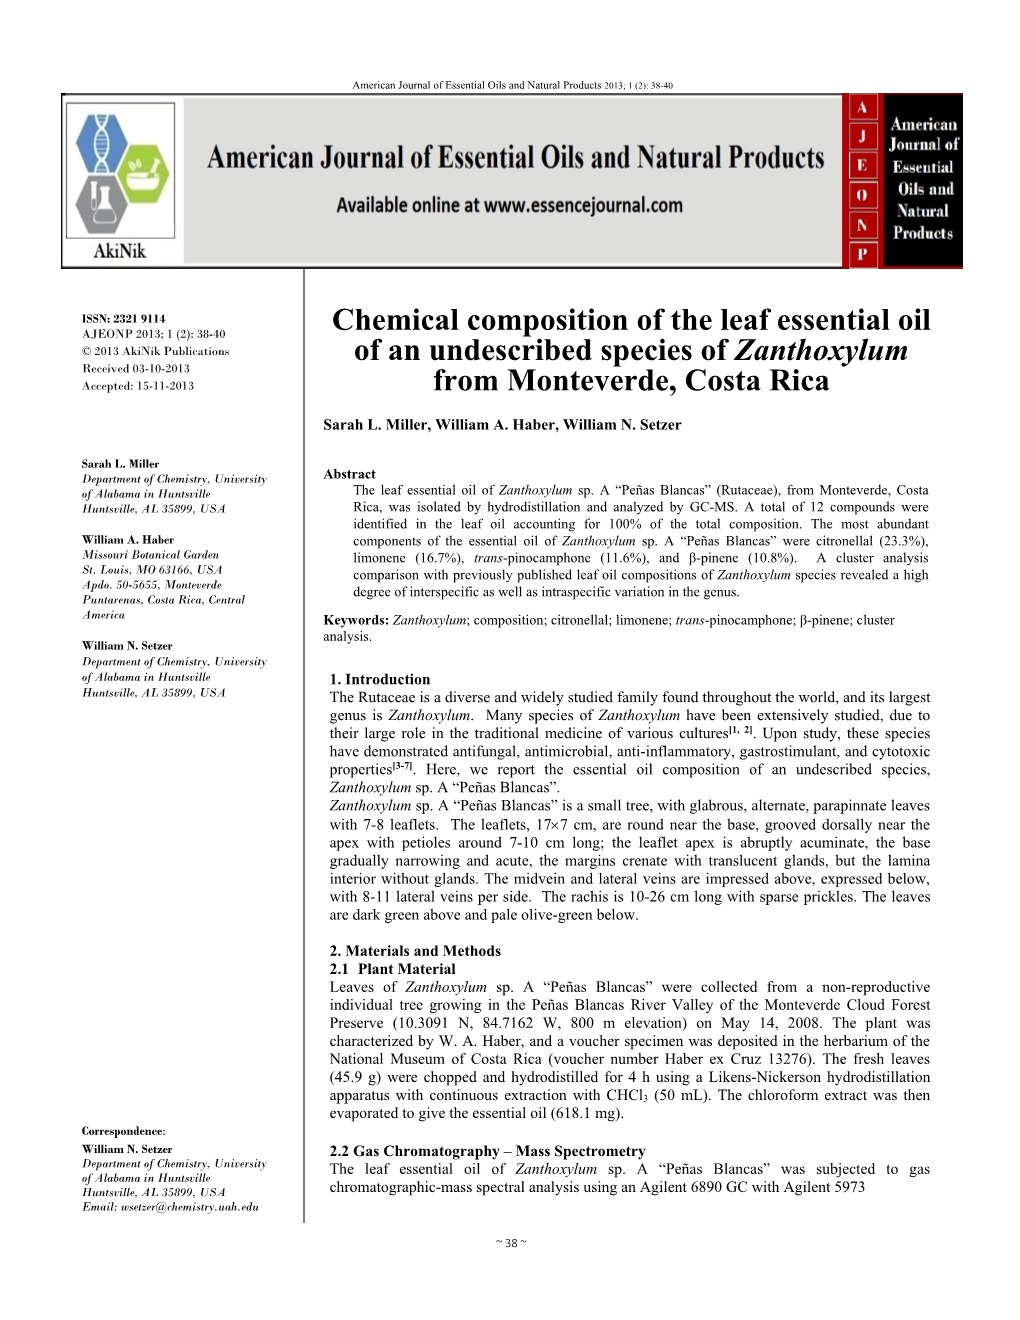 Chemical Composition of the Leaf Essential Oil of an Undescribed